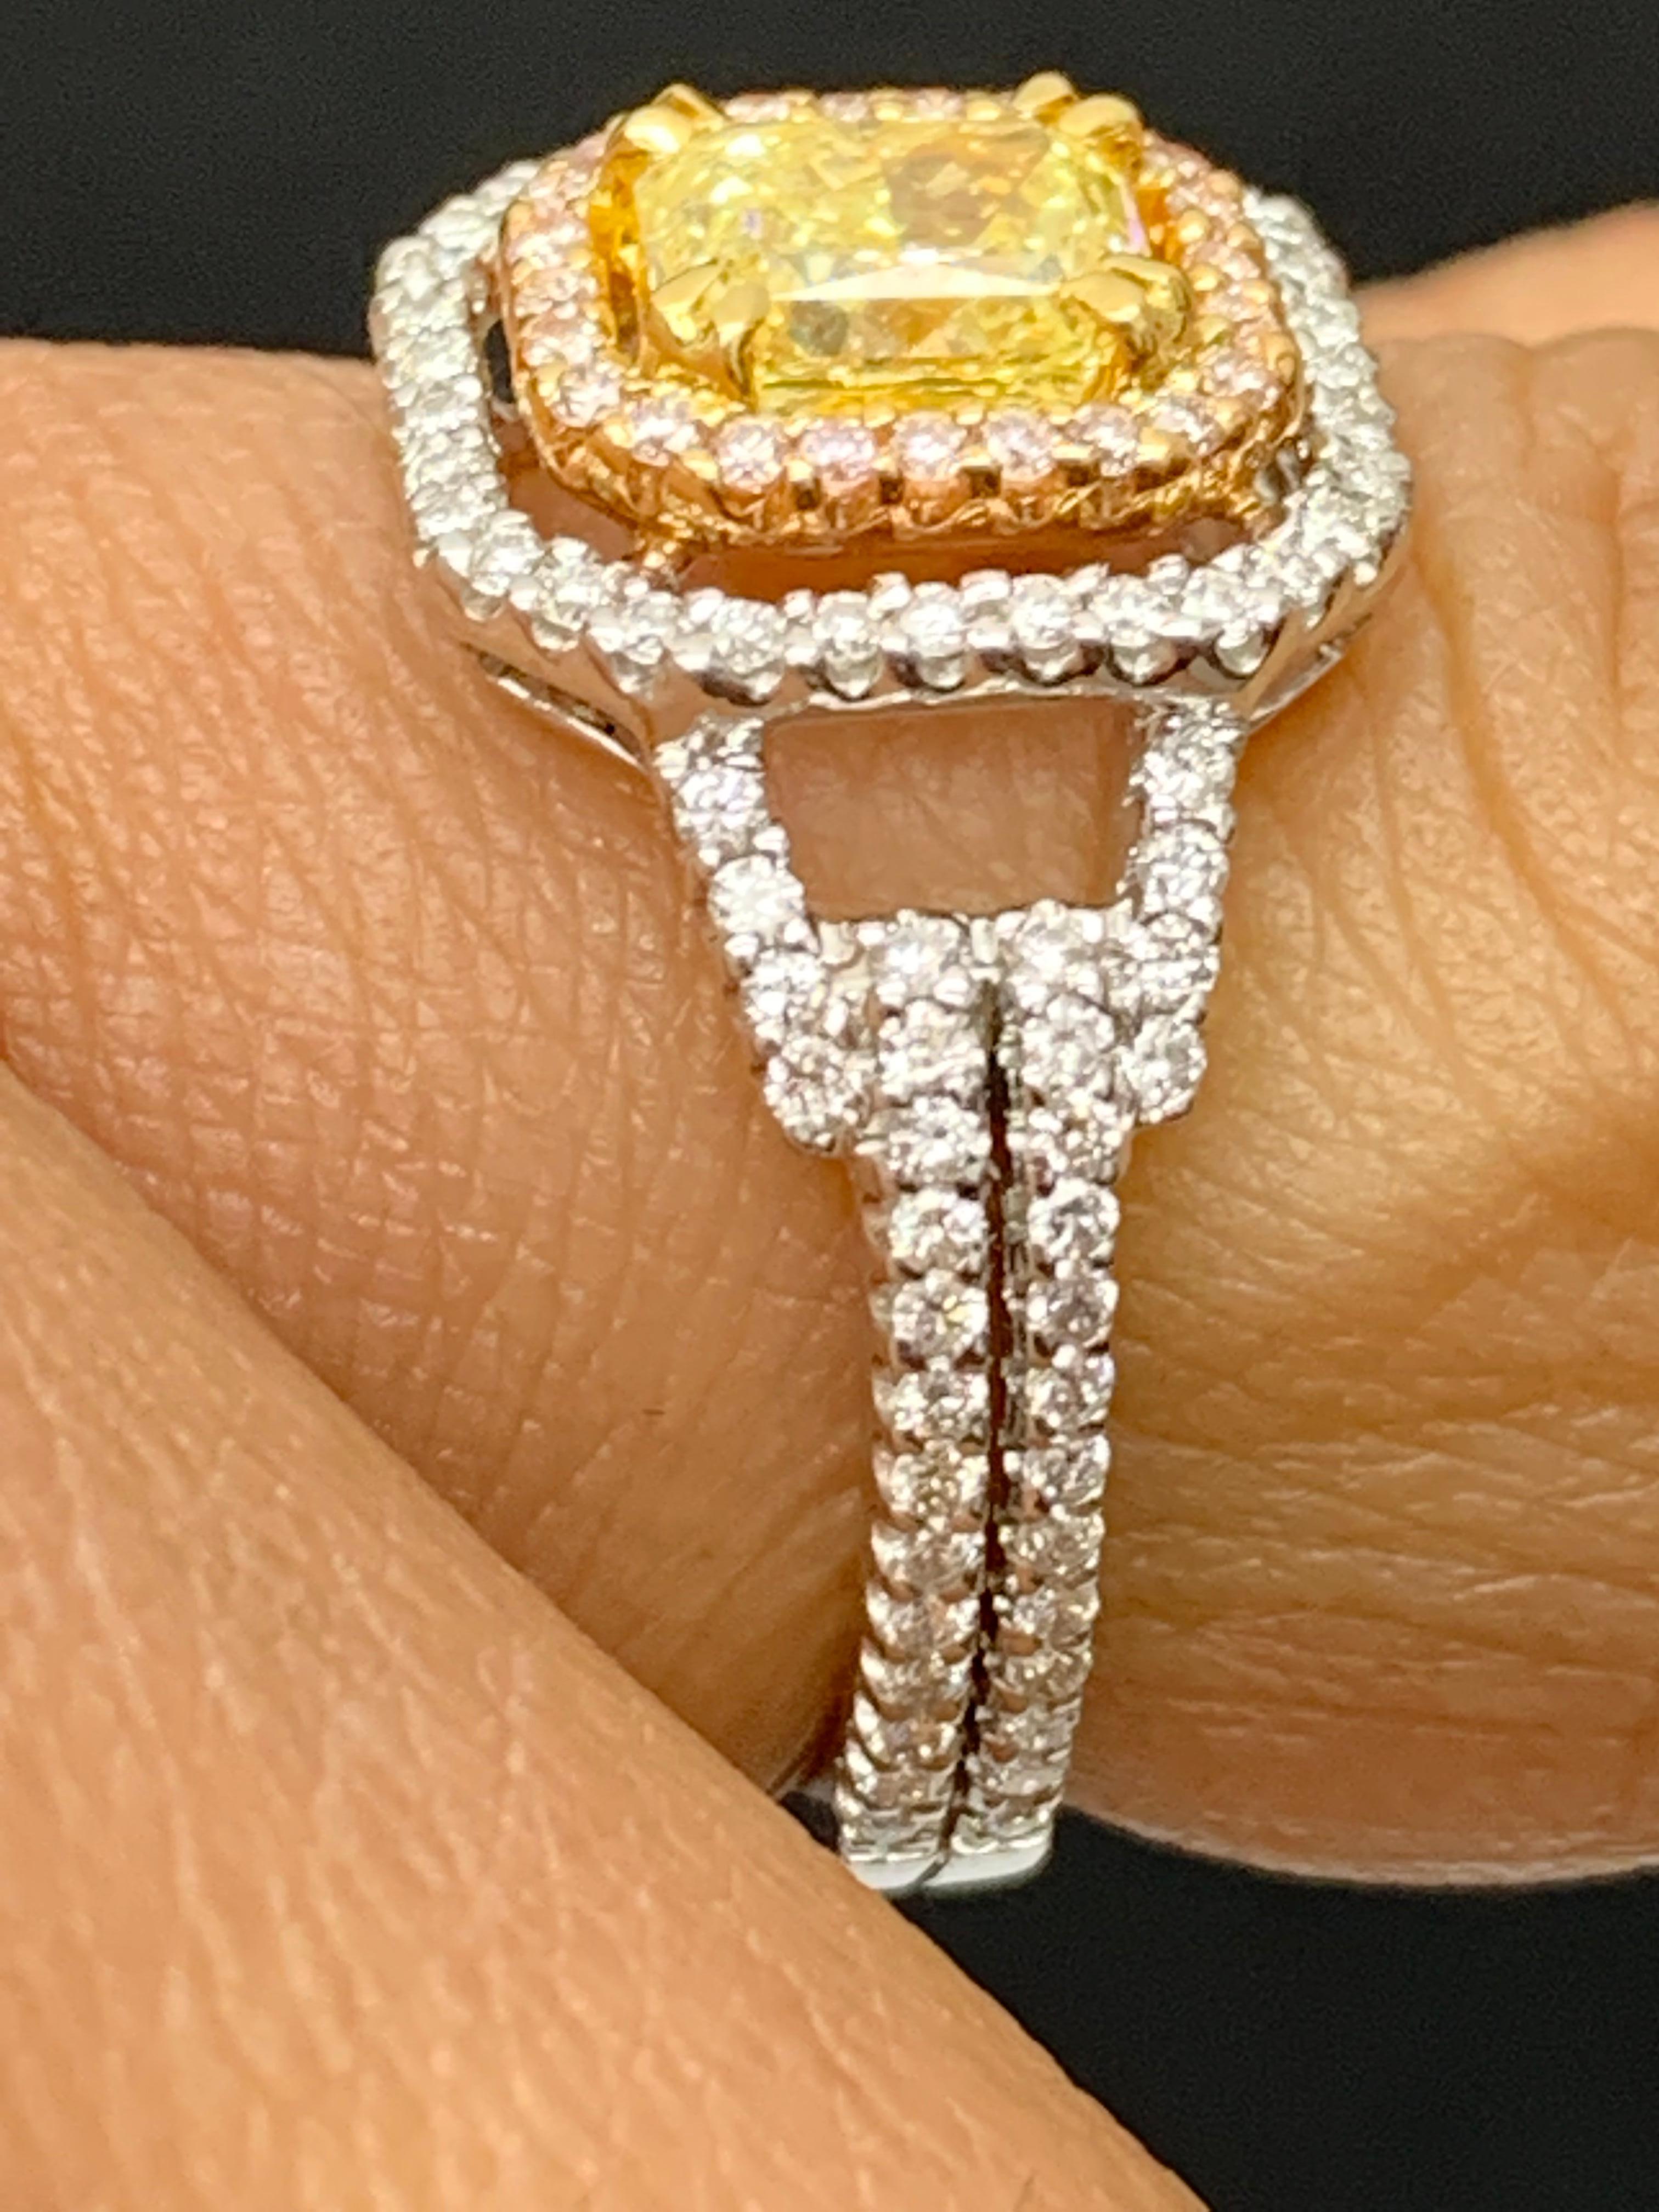 1 Carat Emerald Cut Yellow Diamond Ring in 18k Mix Gold For Sale 7